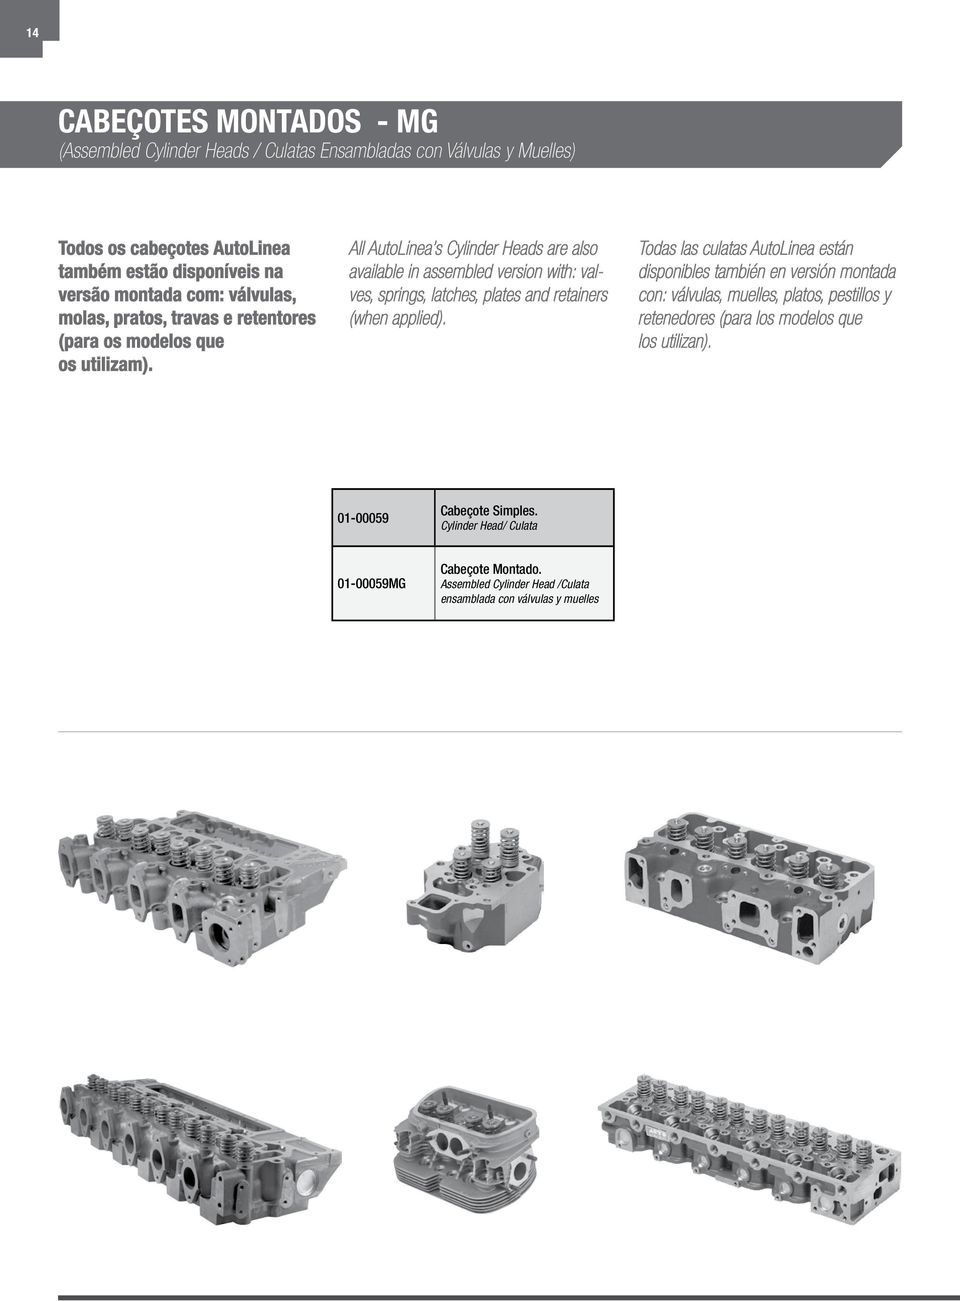 All AutoLinea s Cylinder Heads are also available in assembled version with: valves, springs, latches, plates and retainers (when applied).